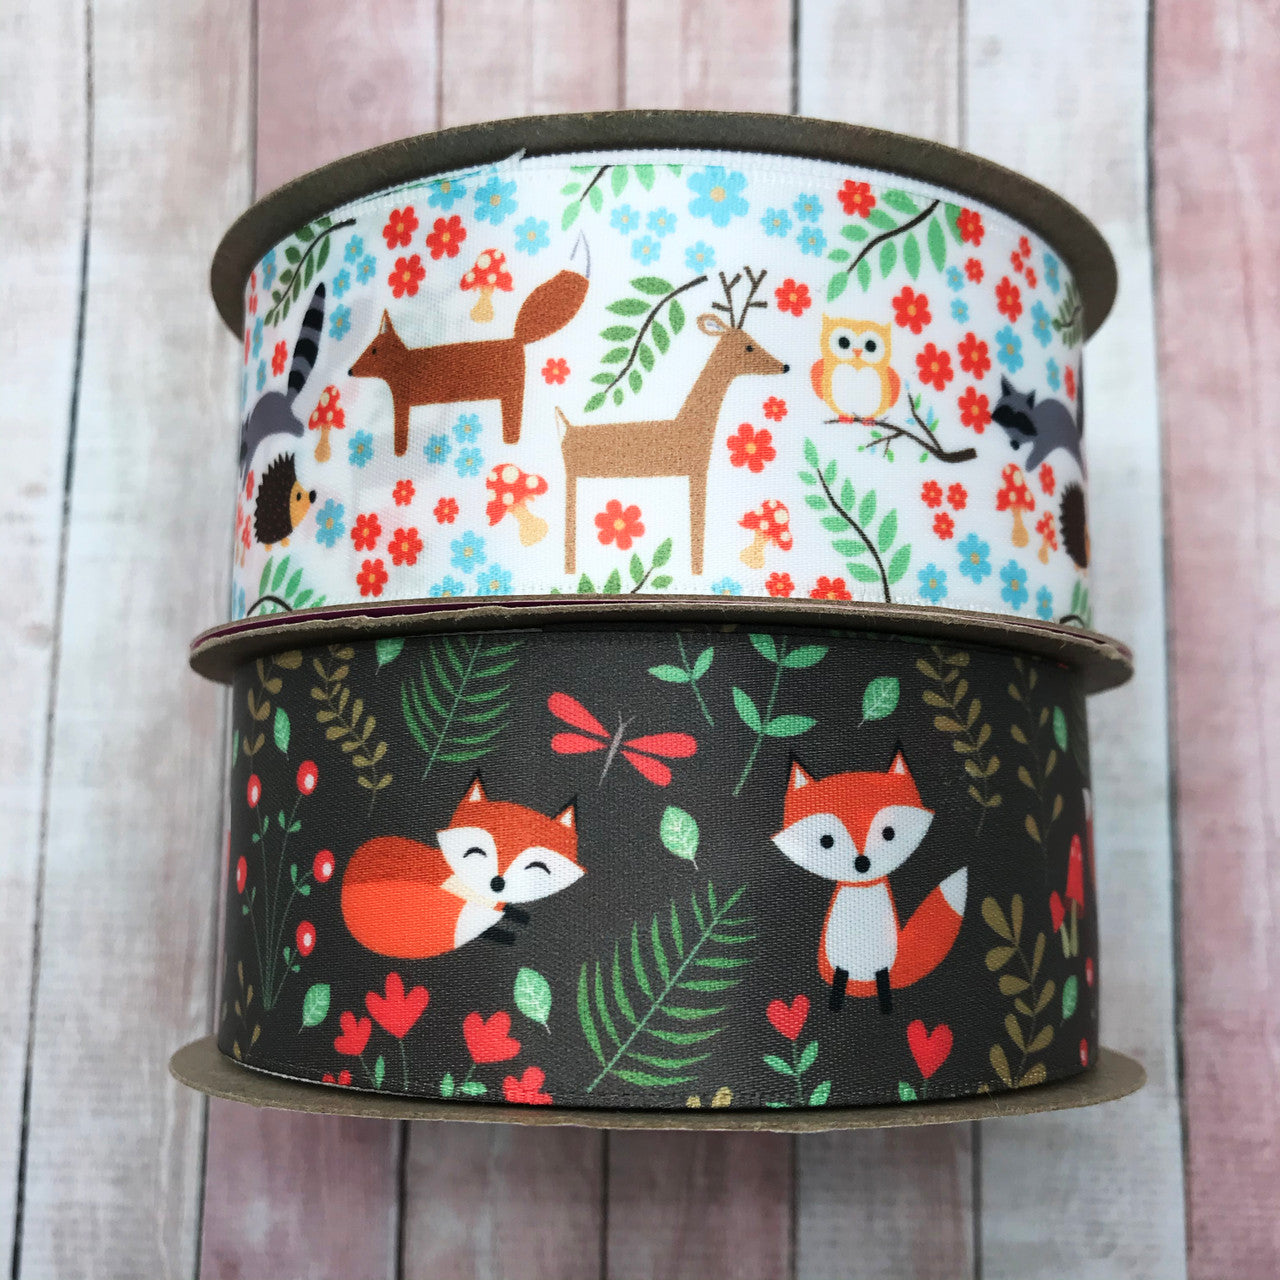 Pair these two woodland animal themed ribbons to create the perfect Woodland animal party, craft,  quilting  or sewing project! All our ribbon is washable, can be ironed and will not fade peel or flake!